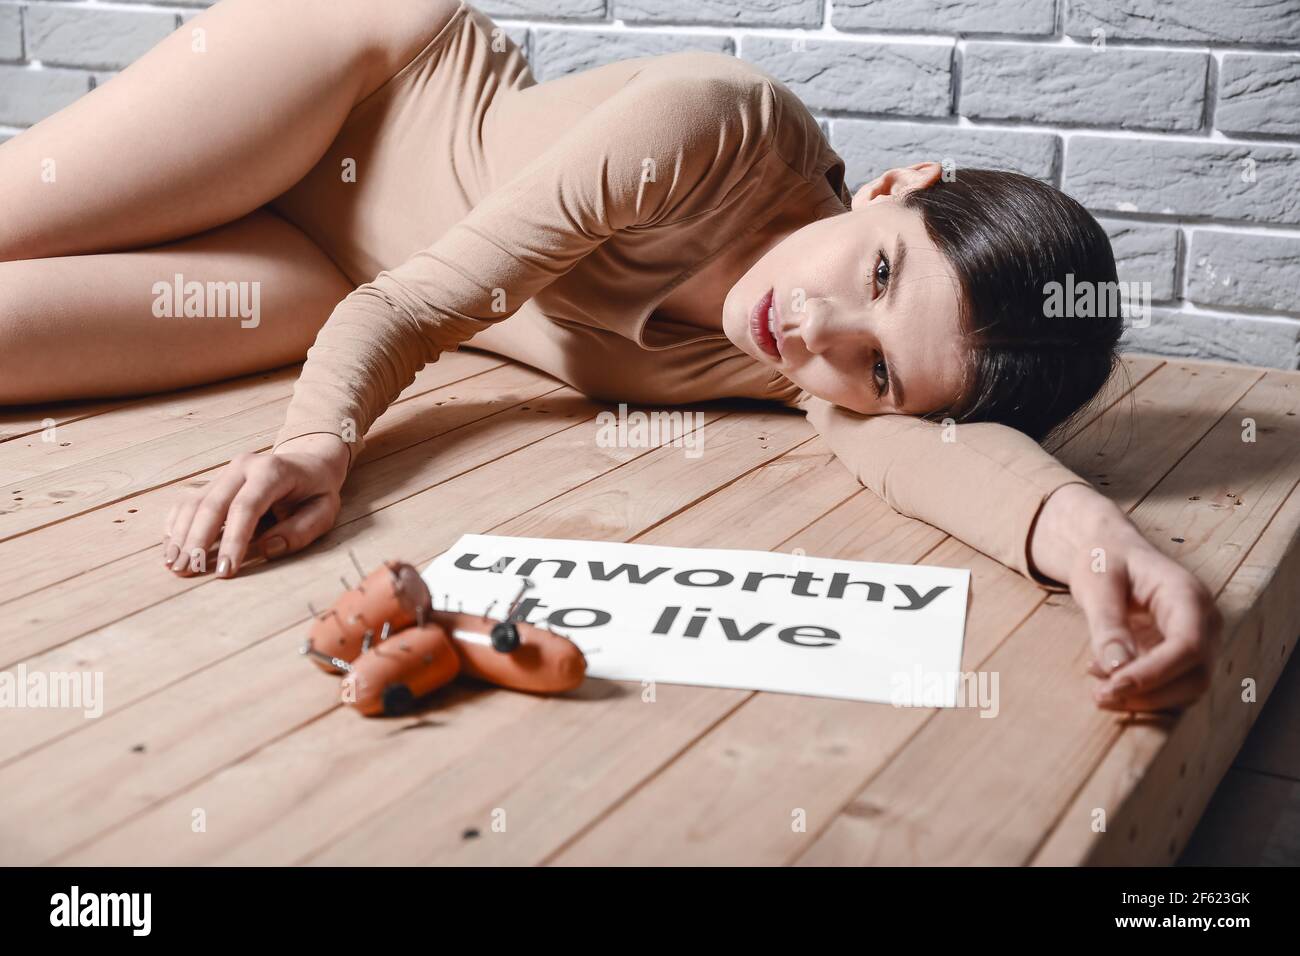 Young woman lying on floor near sausages with nails. Concept of cruelty to animals Stock Photo